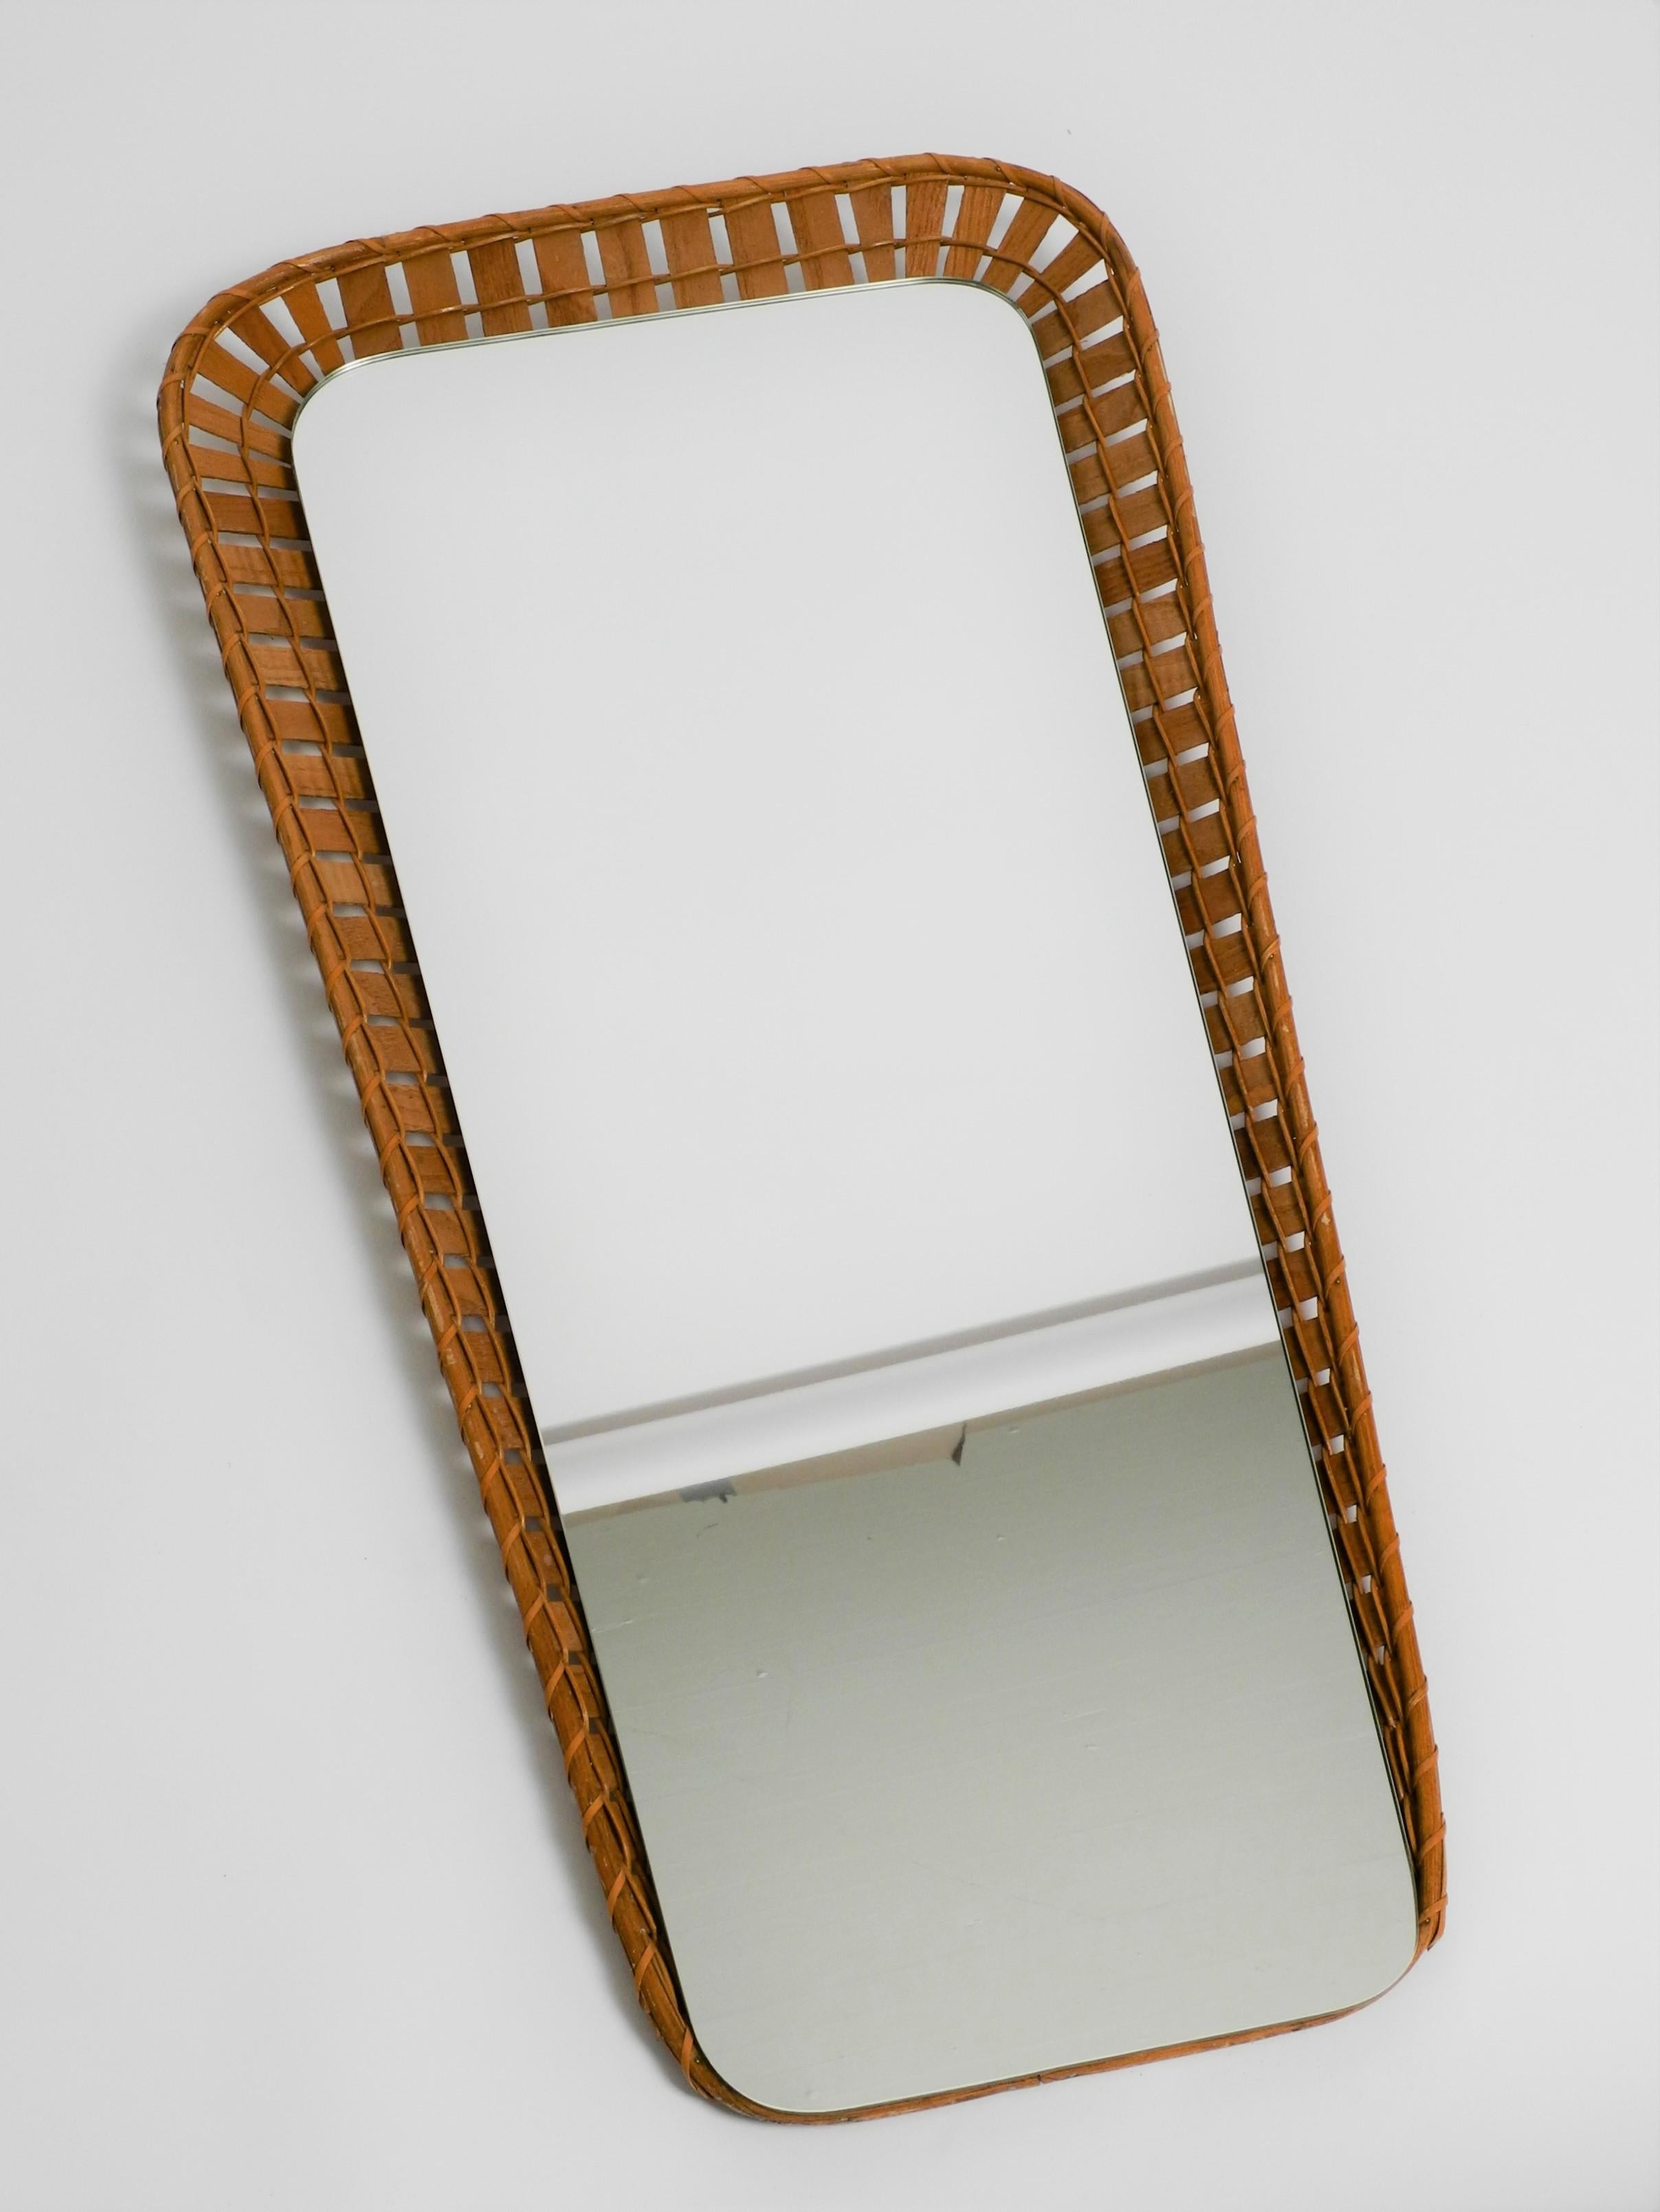 Vintage trapezoidal rattan mirror with wooden back panel, Italy, 70s.

Dimensions:
Total height 82cm/32,3inch
Width top 40,5cm/15,9inch
Width buttom 26cm/10,2inch
Height of mirror 76cm/29,9inch
Width of mirror top 31cm/12,2inch
Width of